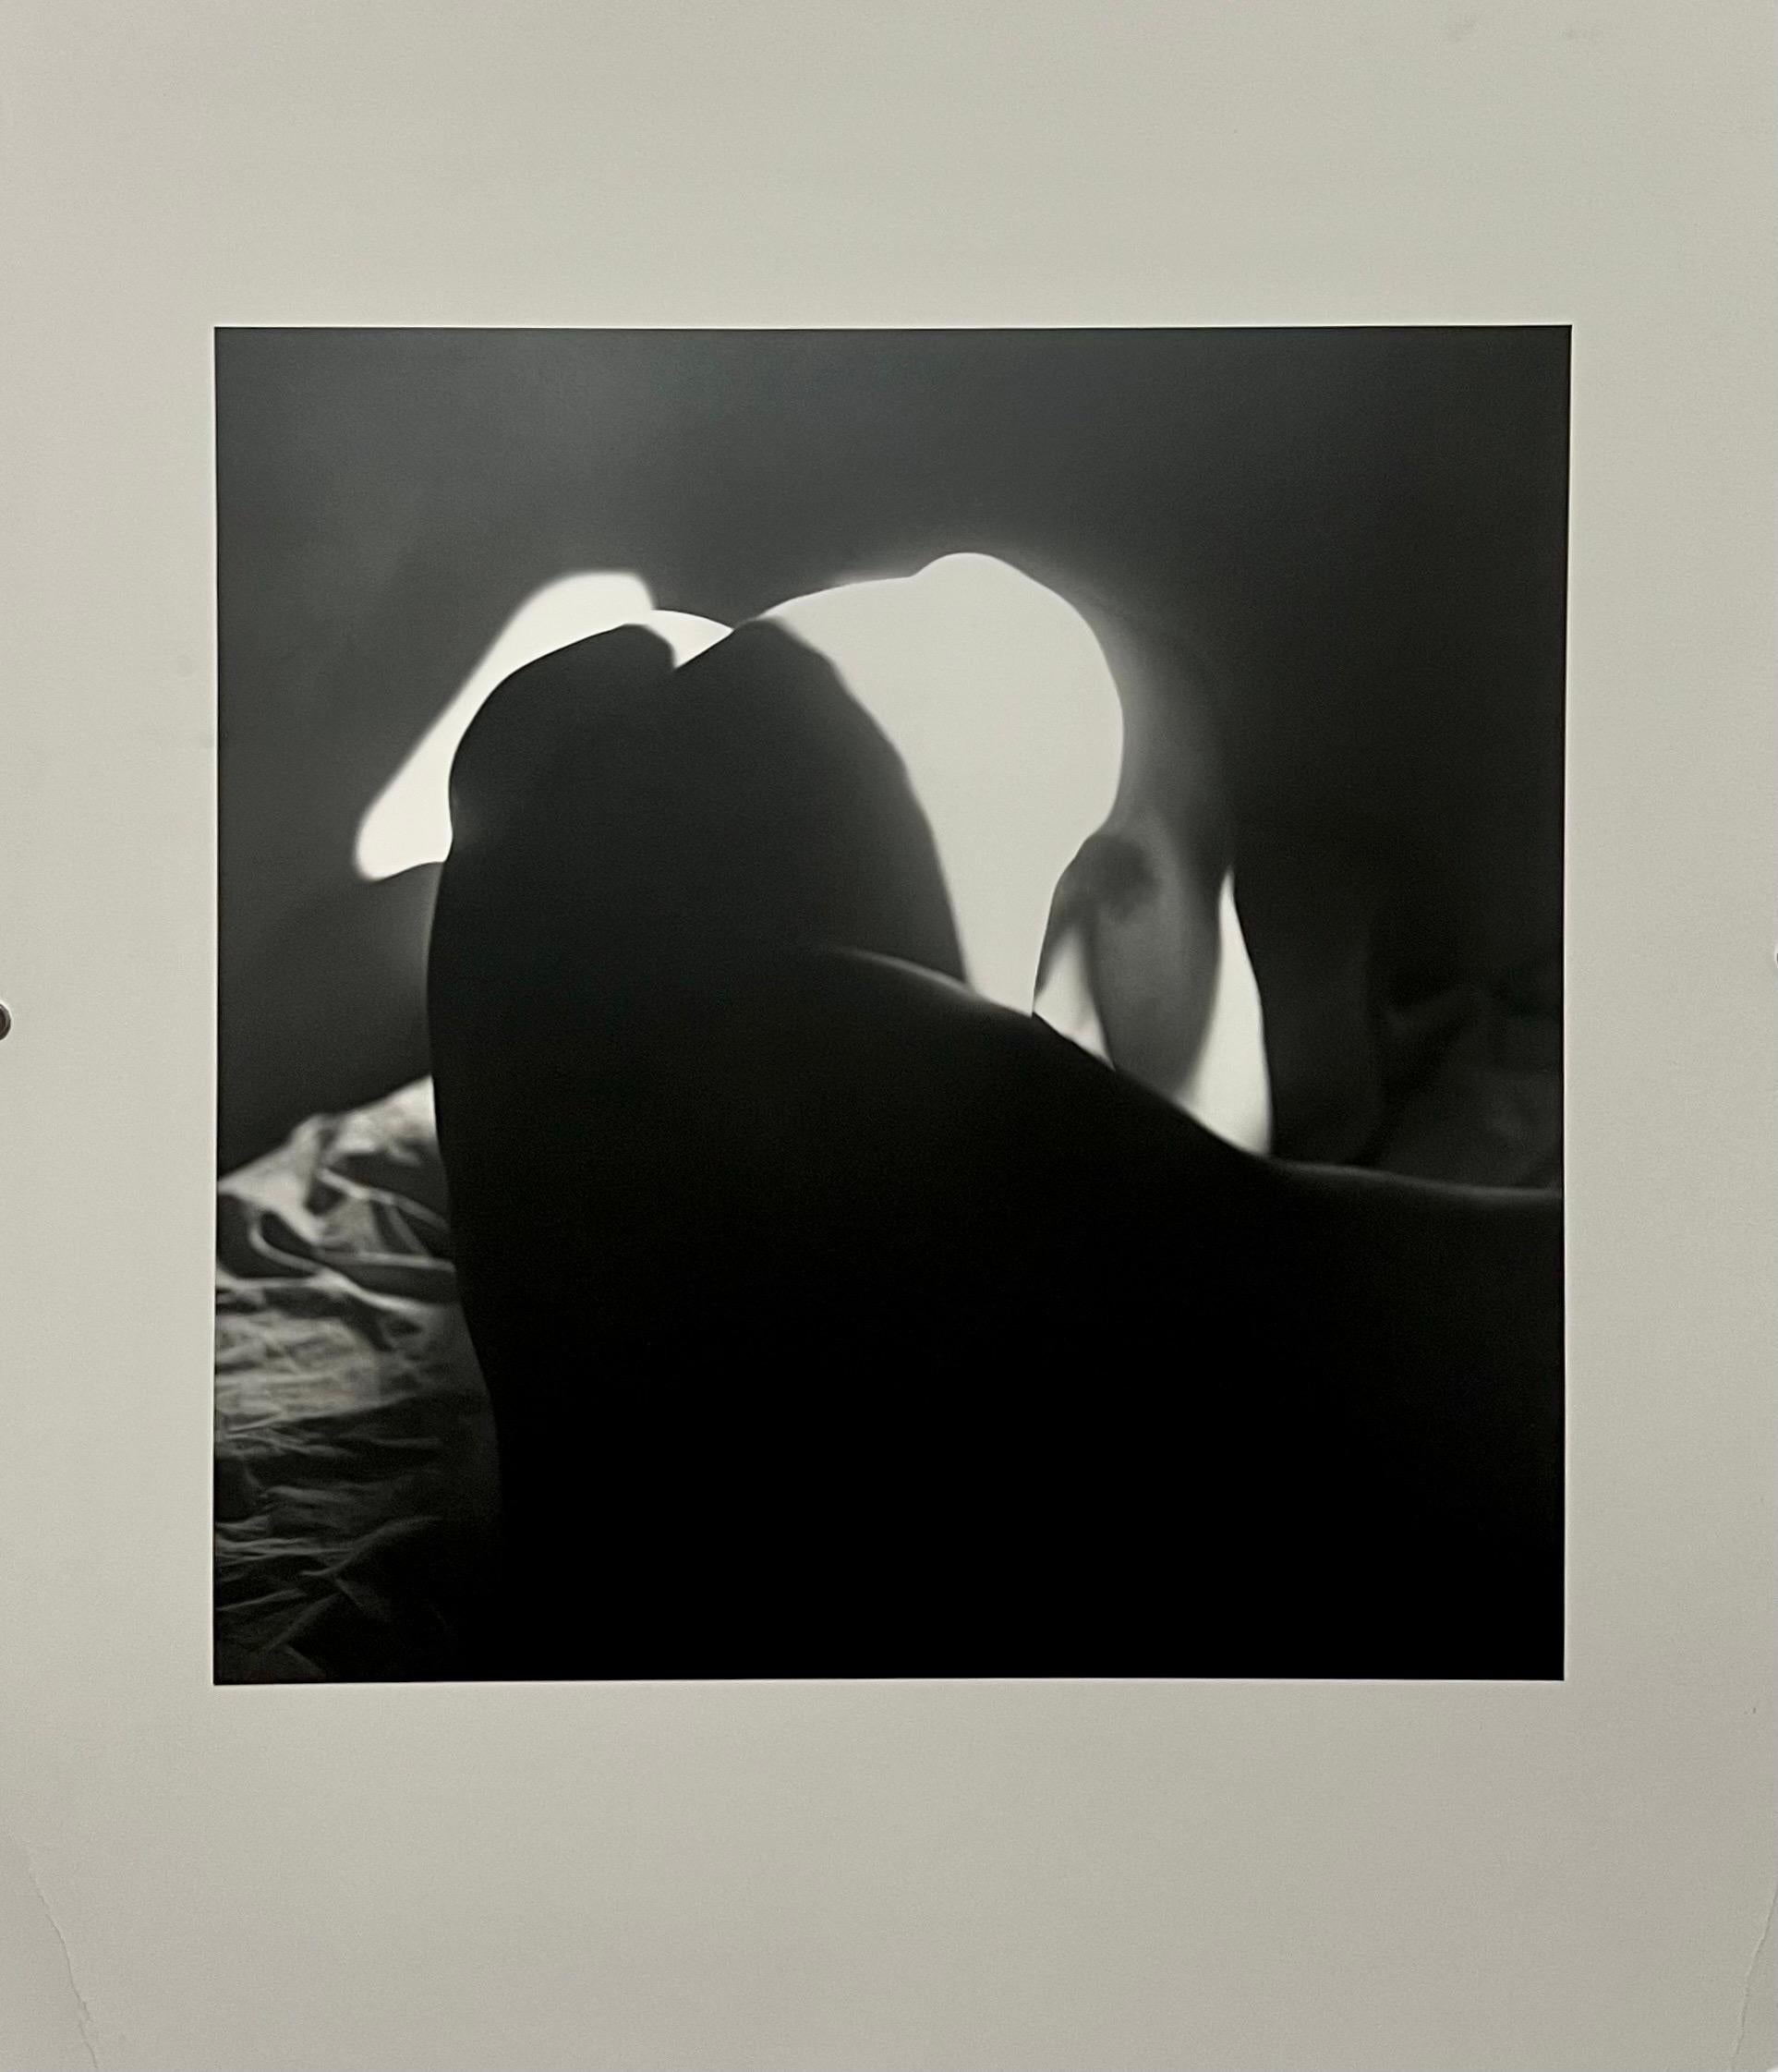 Bruce Cratsley, American (1944-1998)
Vintage gelatin silver print
Light Lines
A surrealist image of a nude with a light study
Hand signed, titled and dated 1987-1988 verso
image (each): 15 1/4 x 15 1/4 inches, matted to 24 X 20 inches
Provenance: